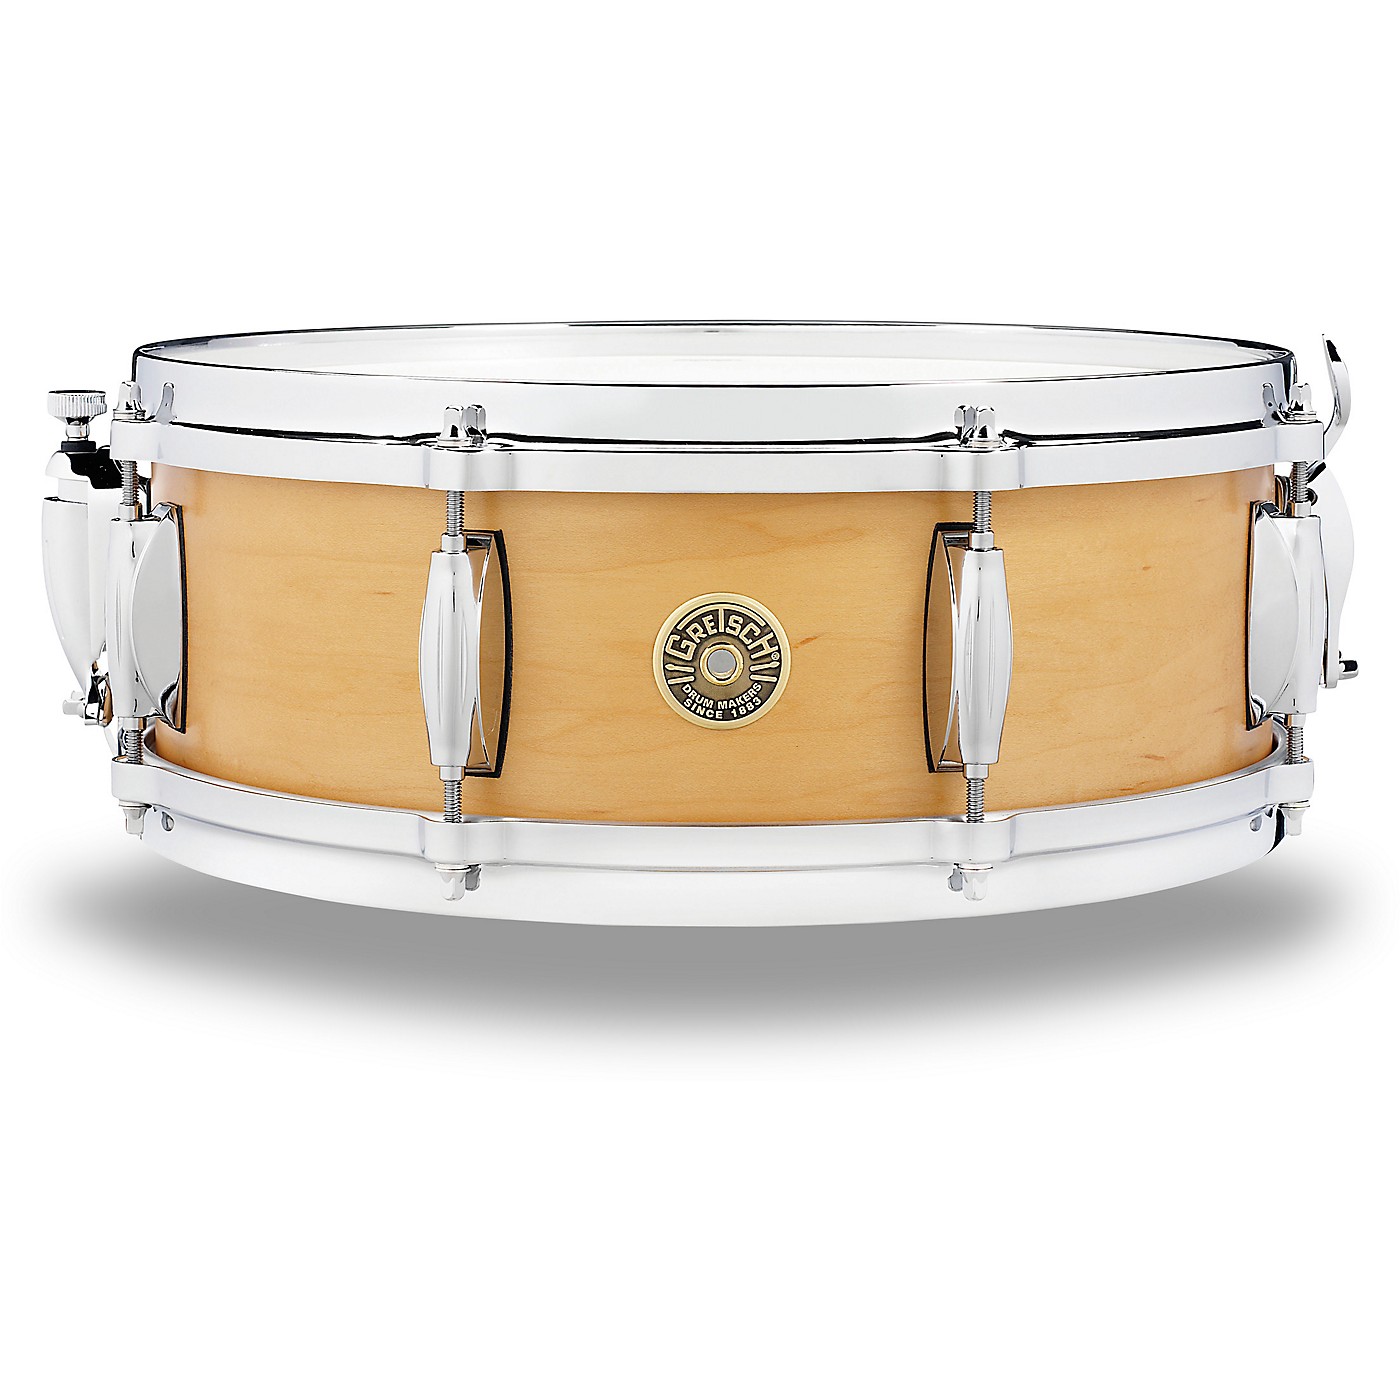 Gretsch Drums USA Custom Snare Drum thumbnail